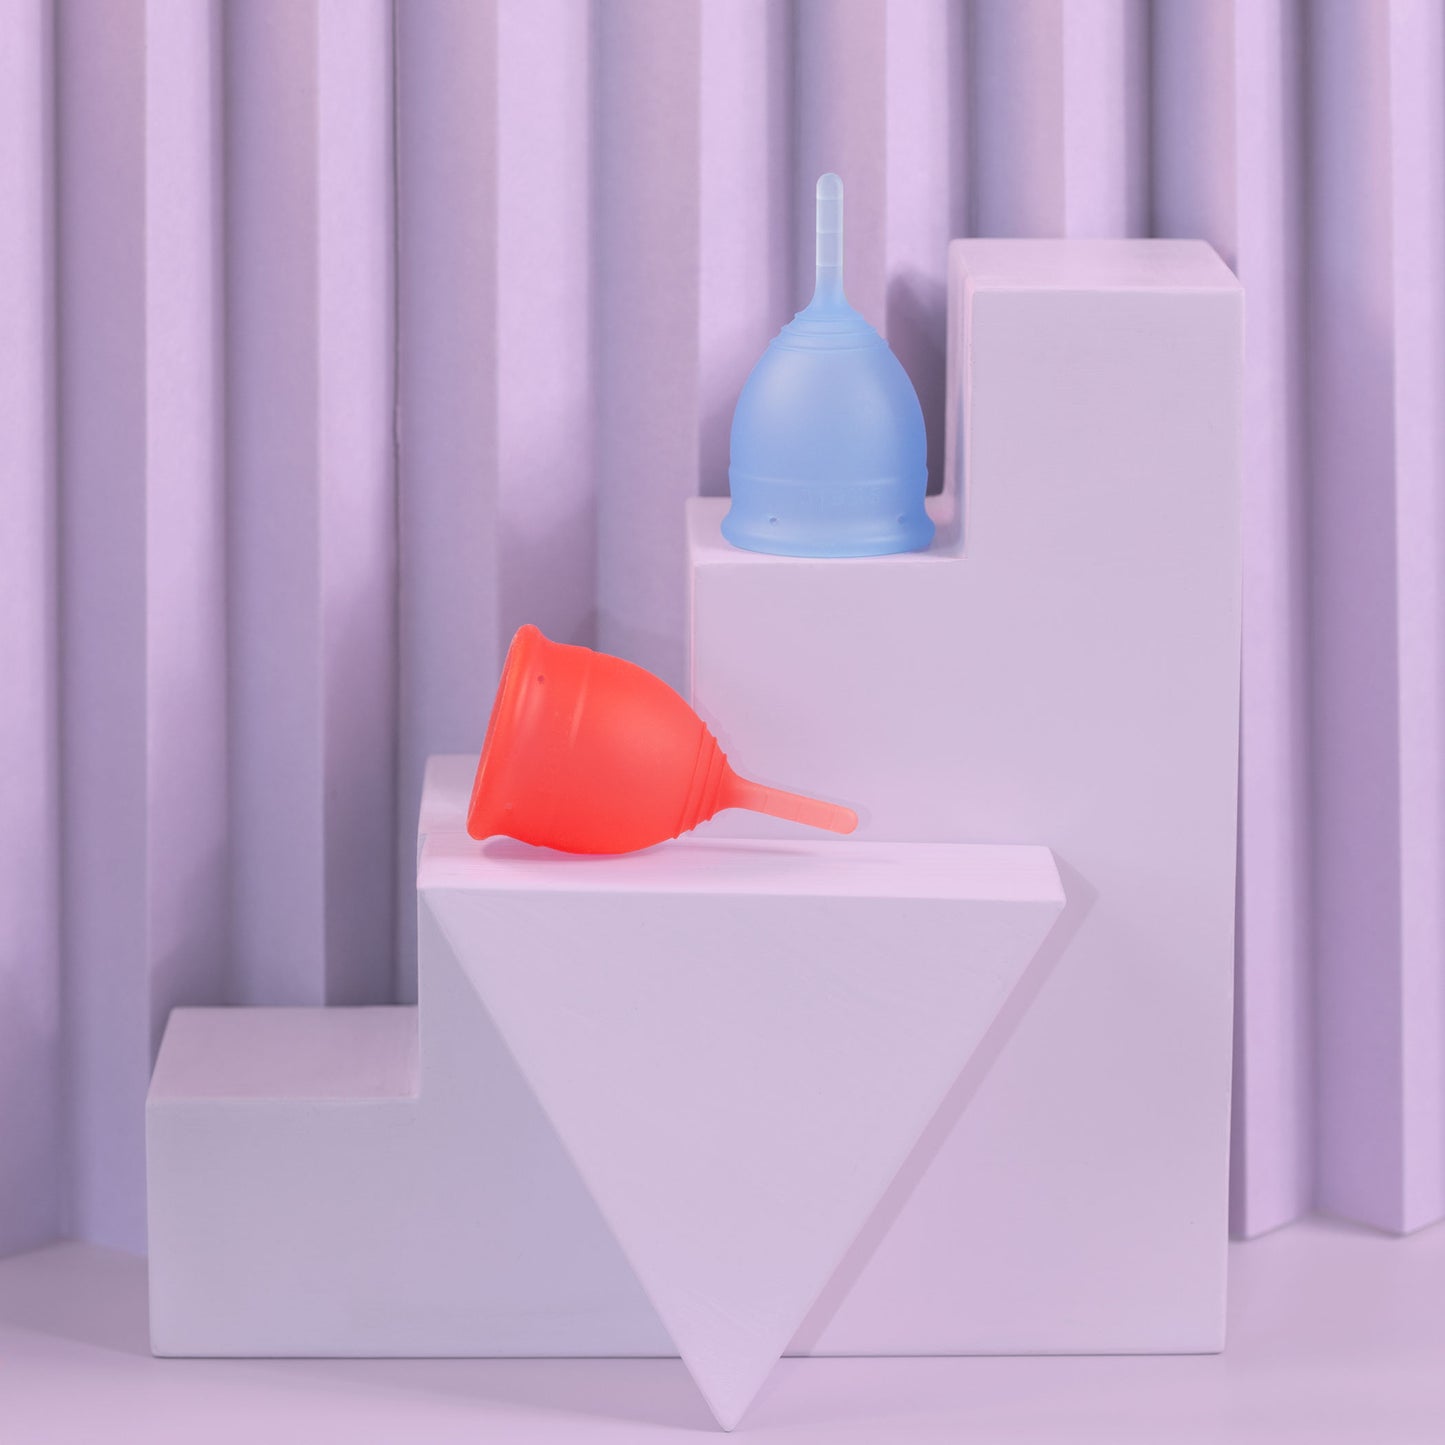 Saalt menstrual cups in size smalls blue and pink on steps